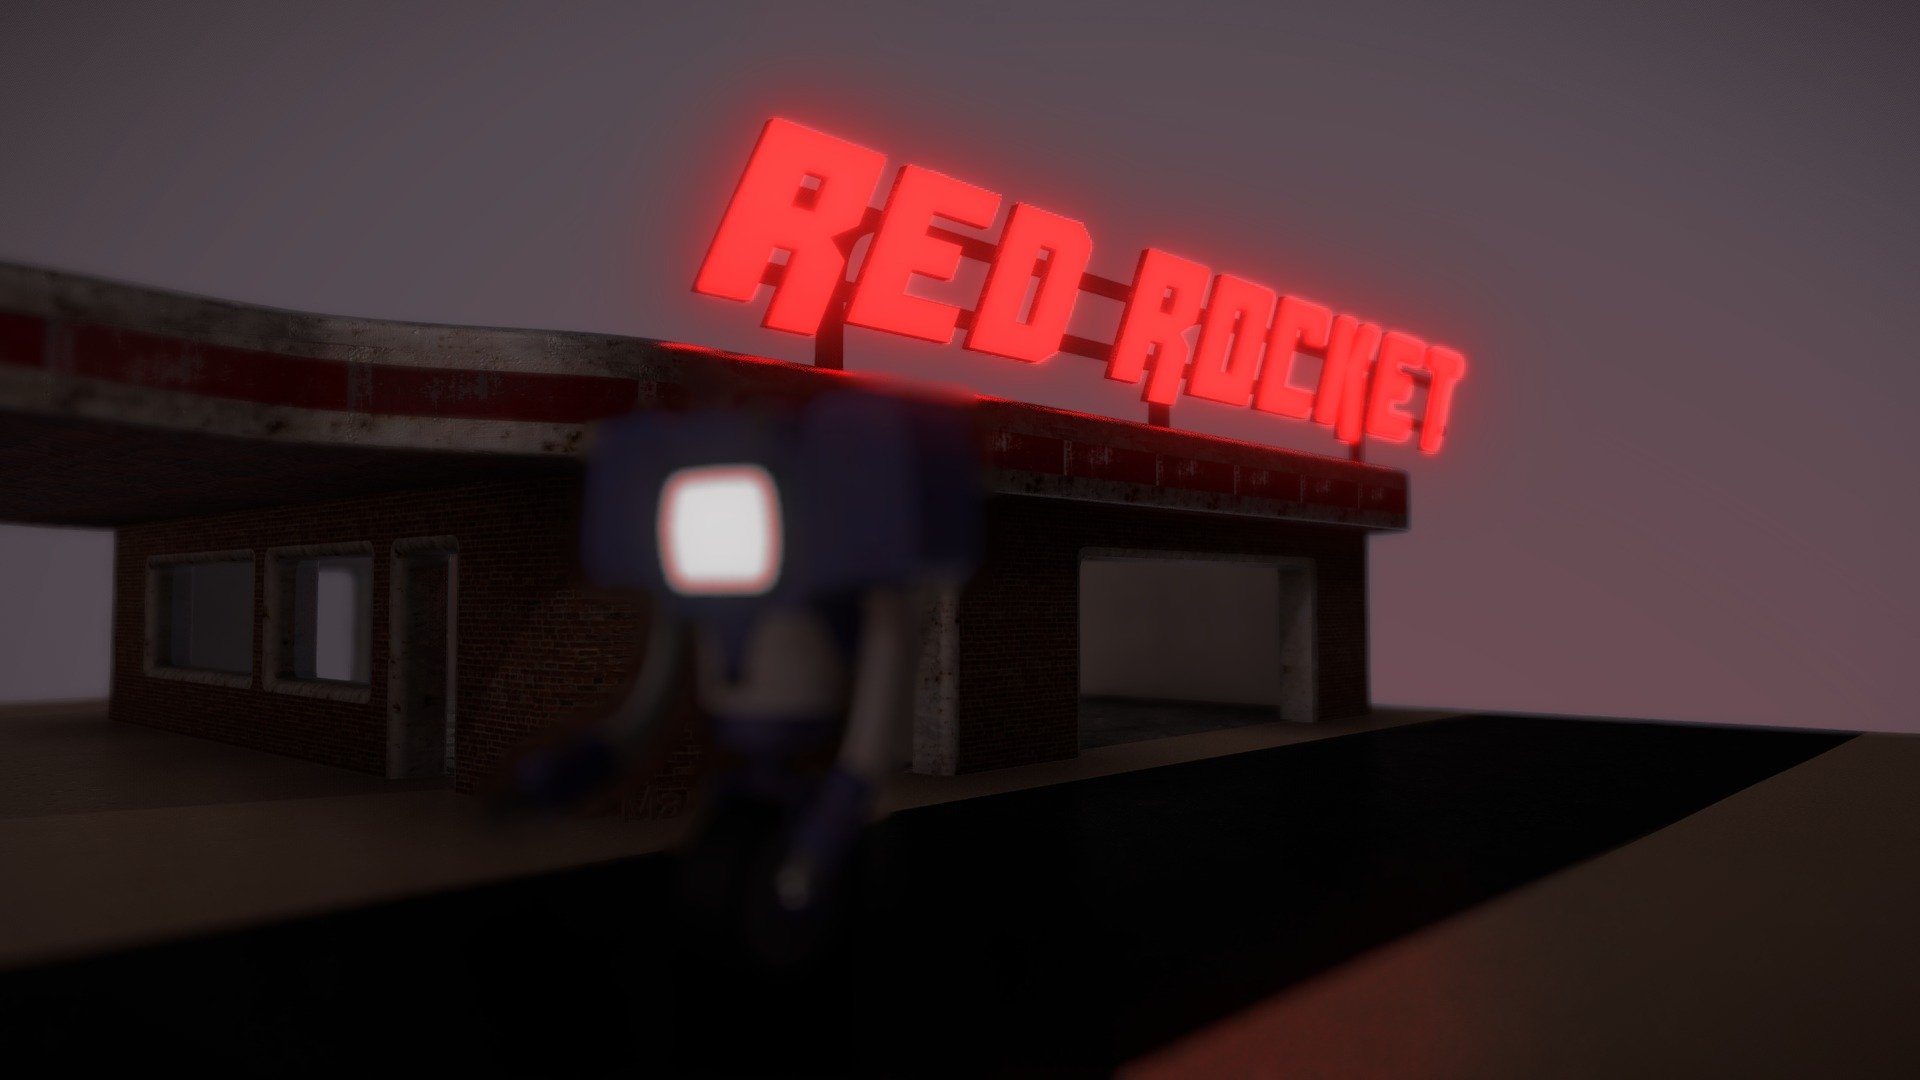 Fallout 4 Red Rocket Truck Stop Download Free 3d Model By Markhinkle Markhinkle 4c4adb4